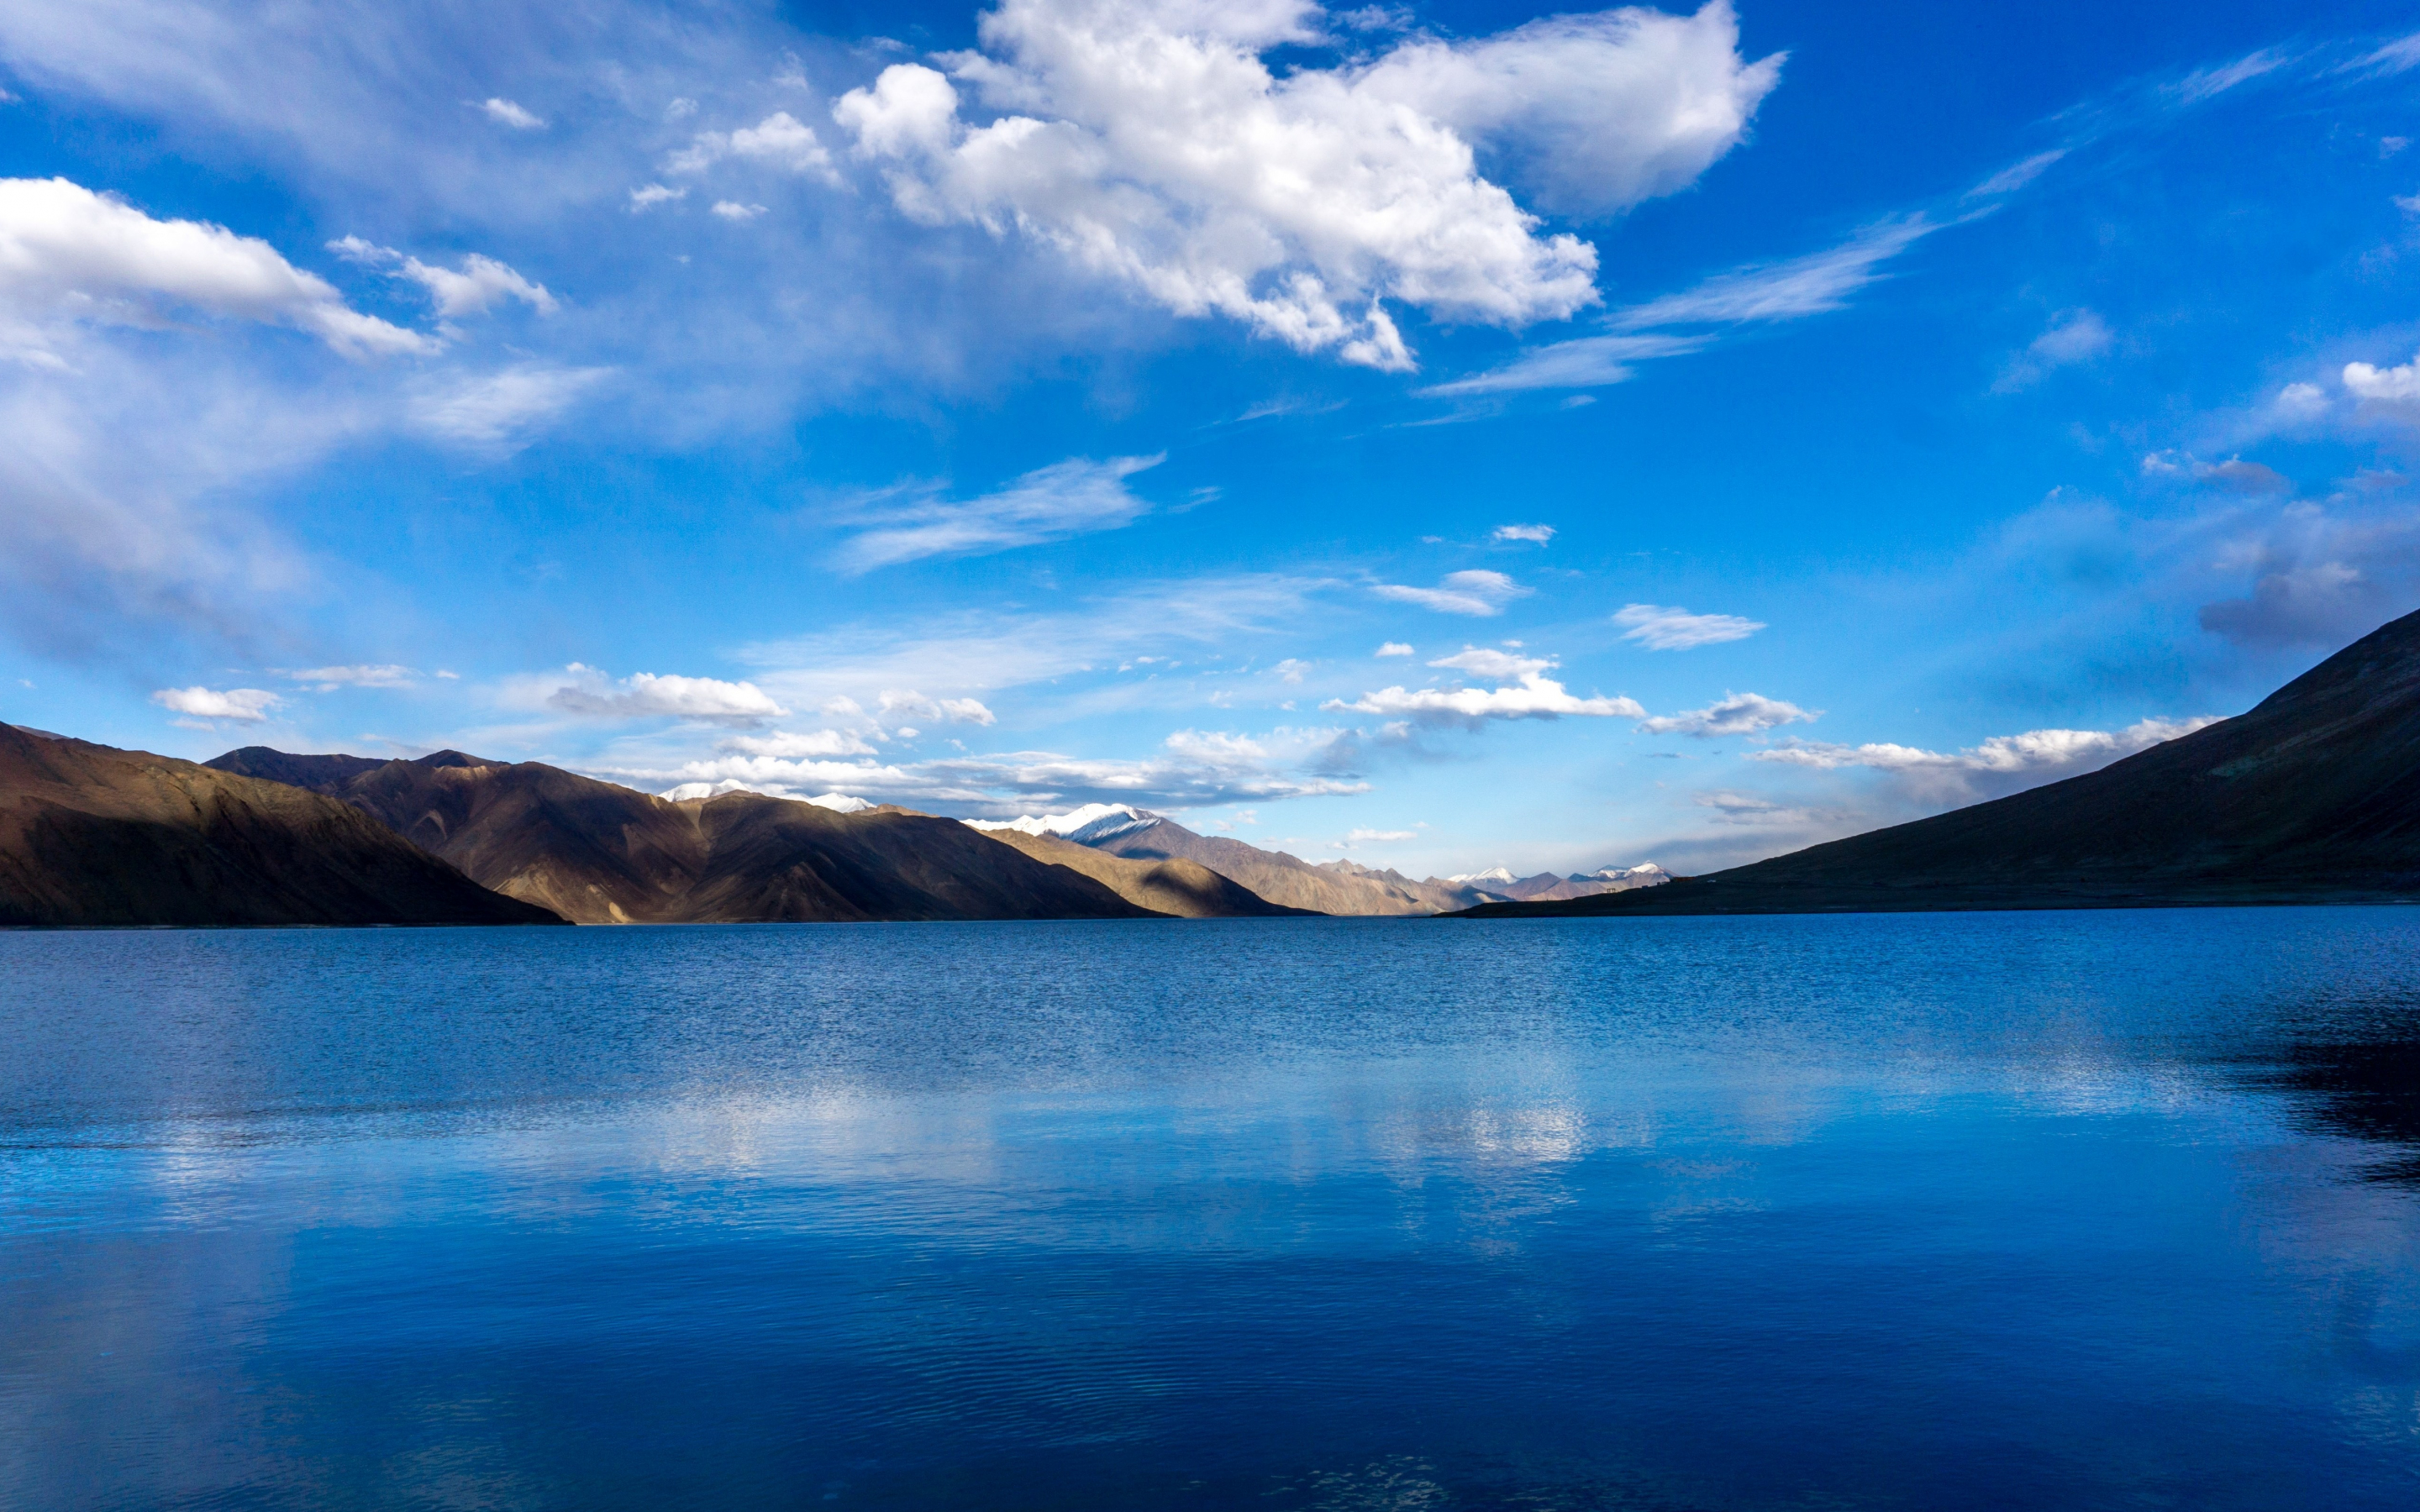 Lake, mountains, sunny day, sky, clouds, nature, 2880x1800 wallpaper